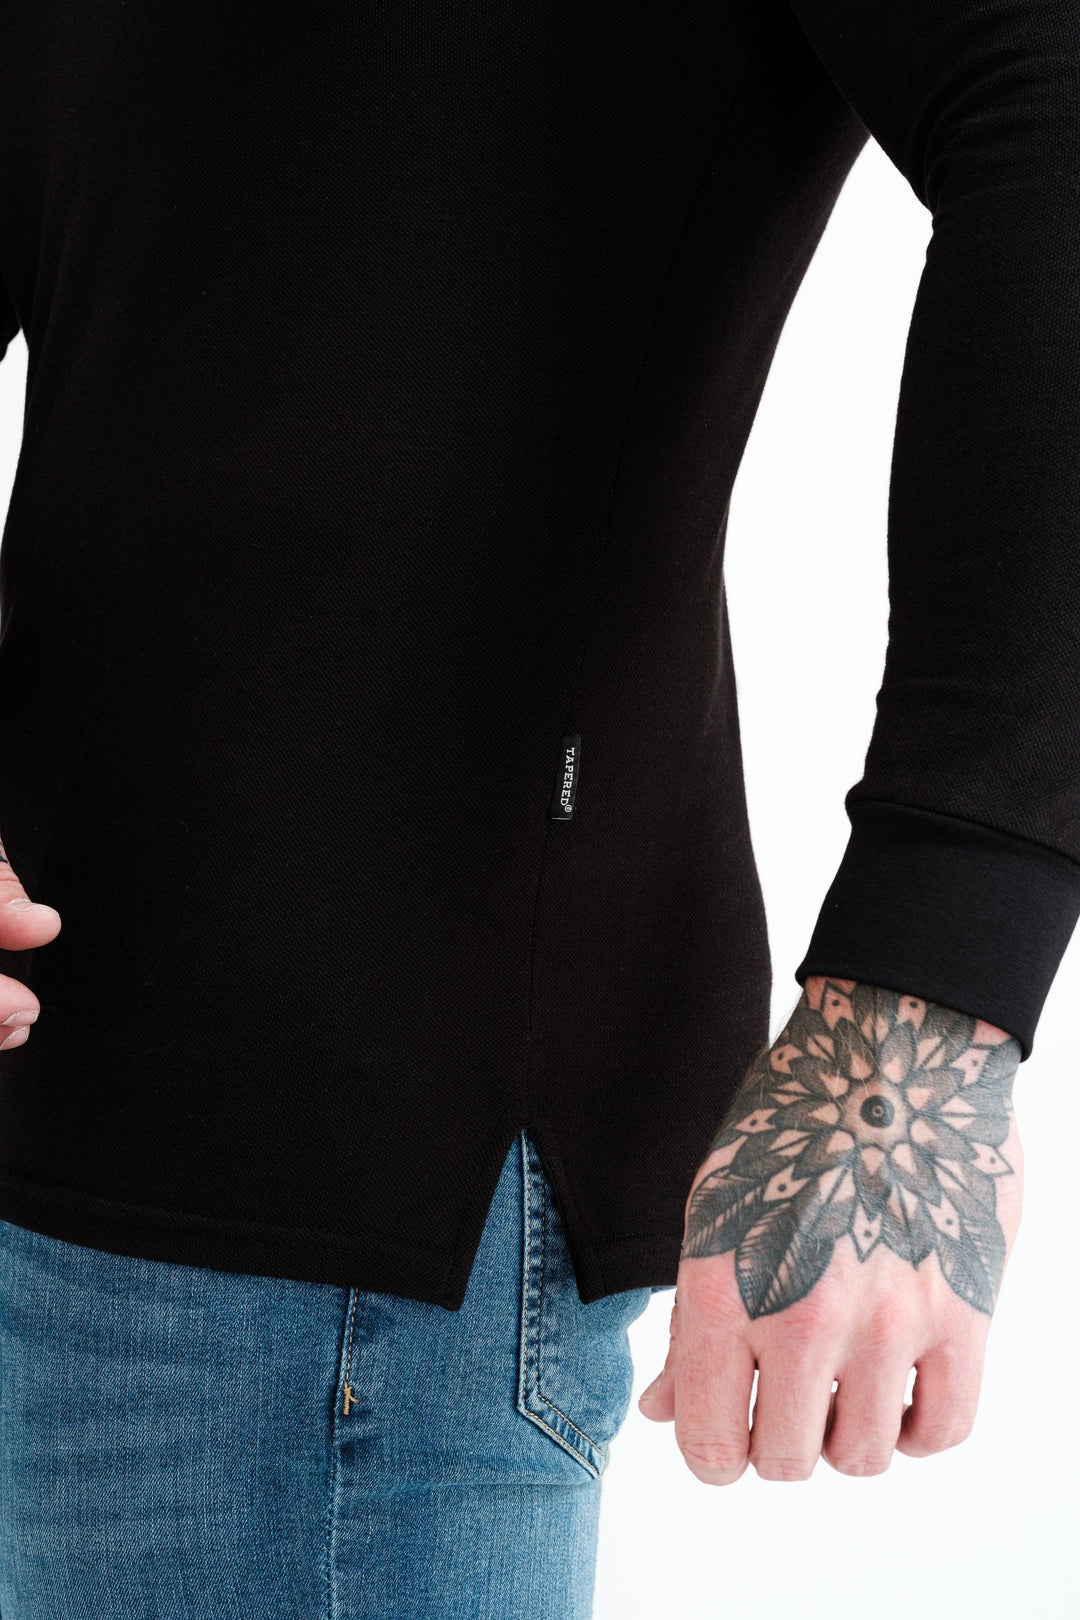 Long Sleeve Black Tapered Fit Polo Shirt